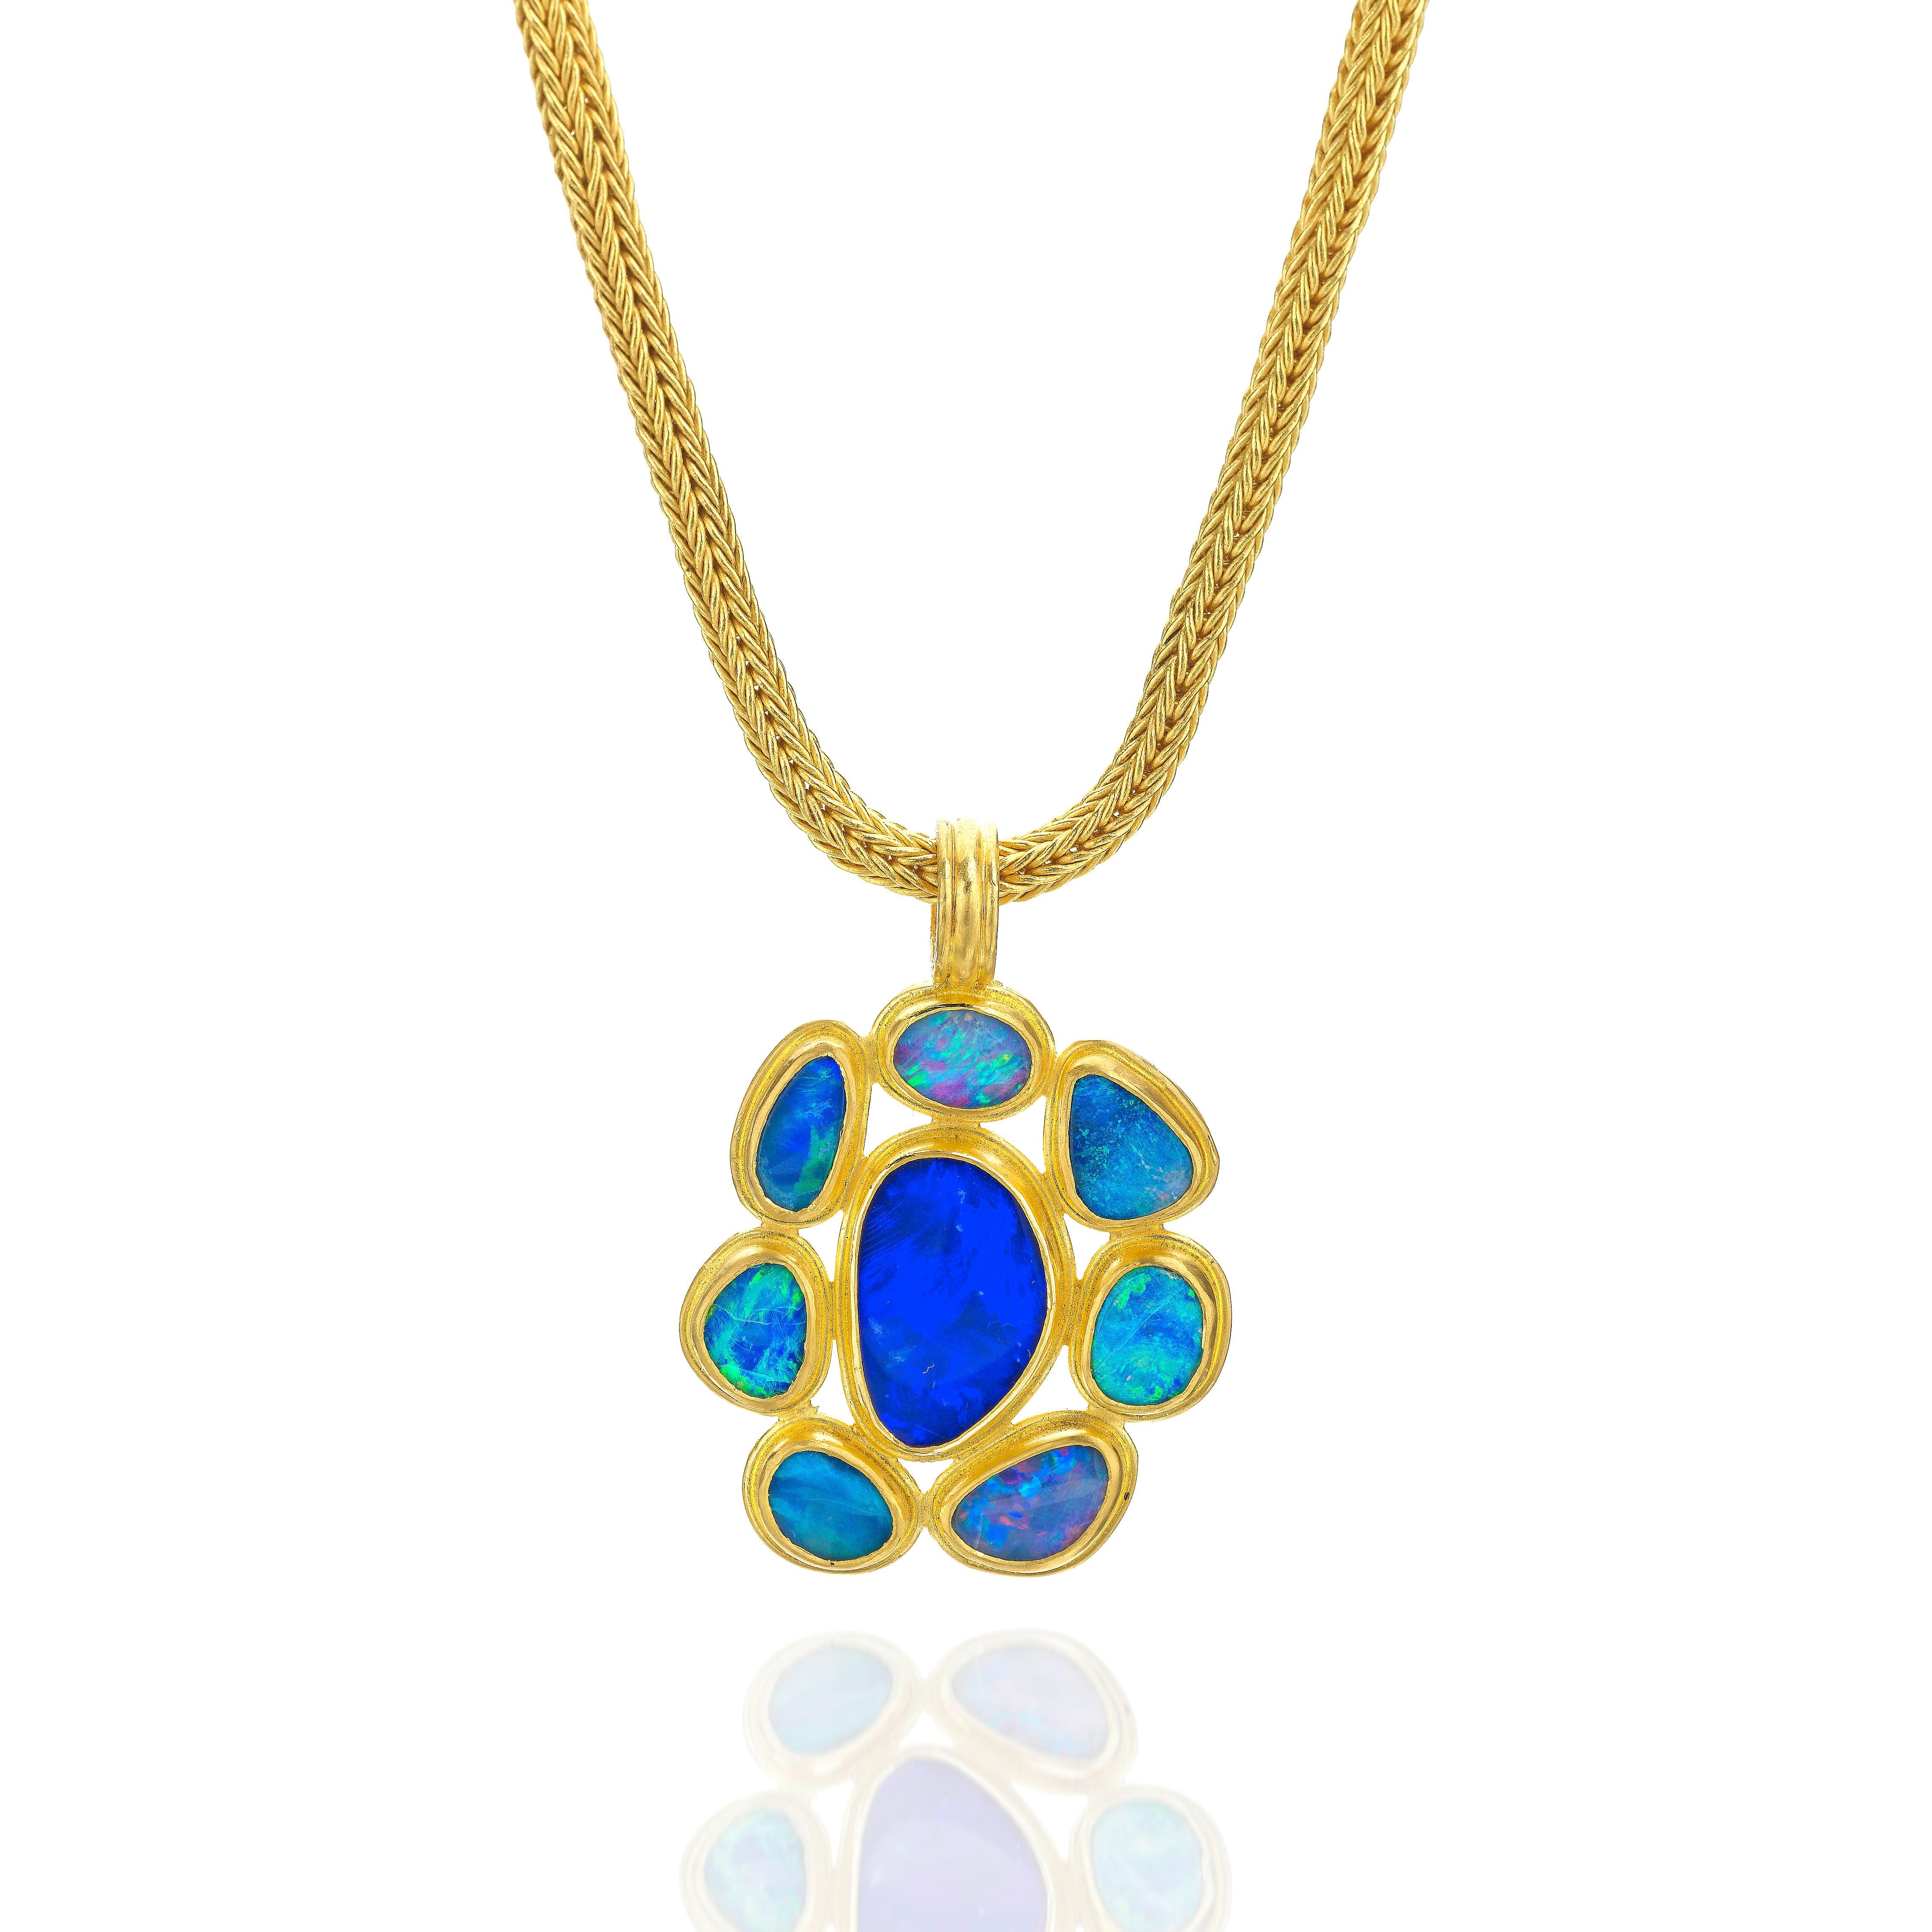 
In Roman times around 250BC opals were valued above all other gems.
Dramatic and vibrant, this free form Opal pendant is set in 22Karat gold and entirely hand crafted by the artist in NYC.
It is presented on a roman rope chain which can be